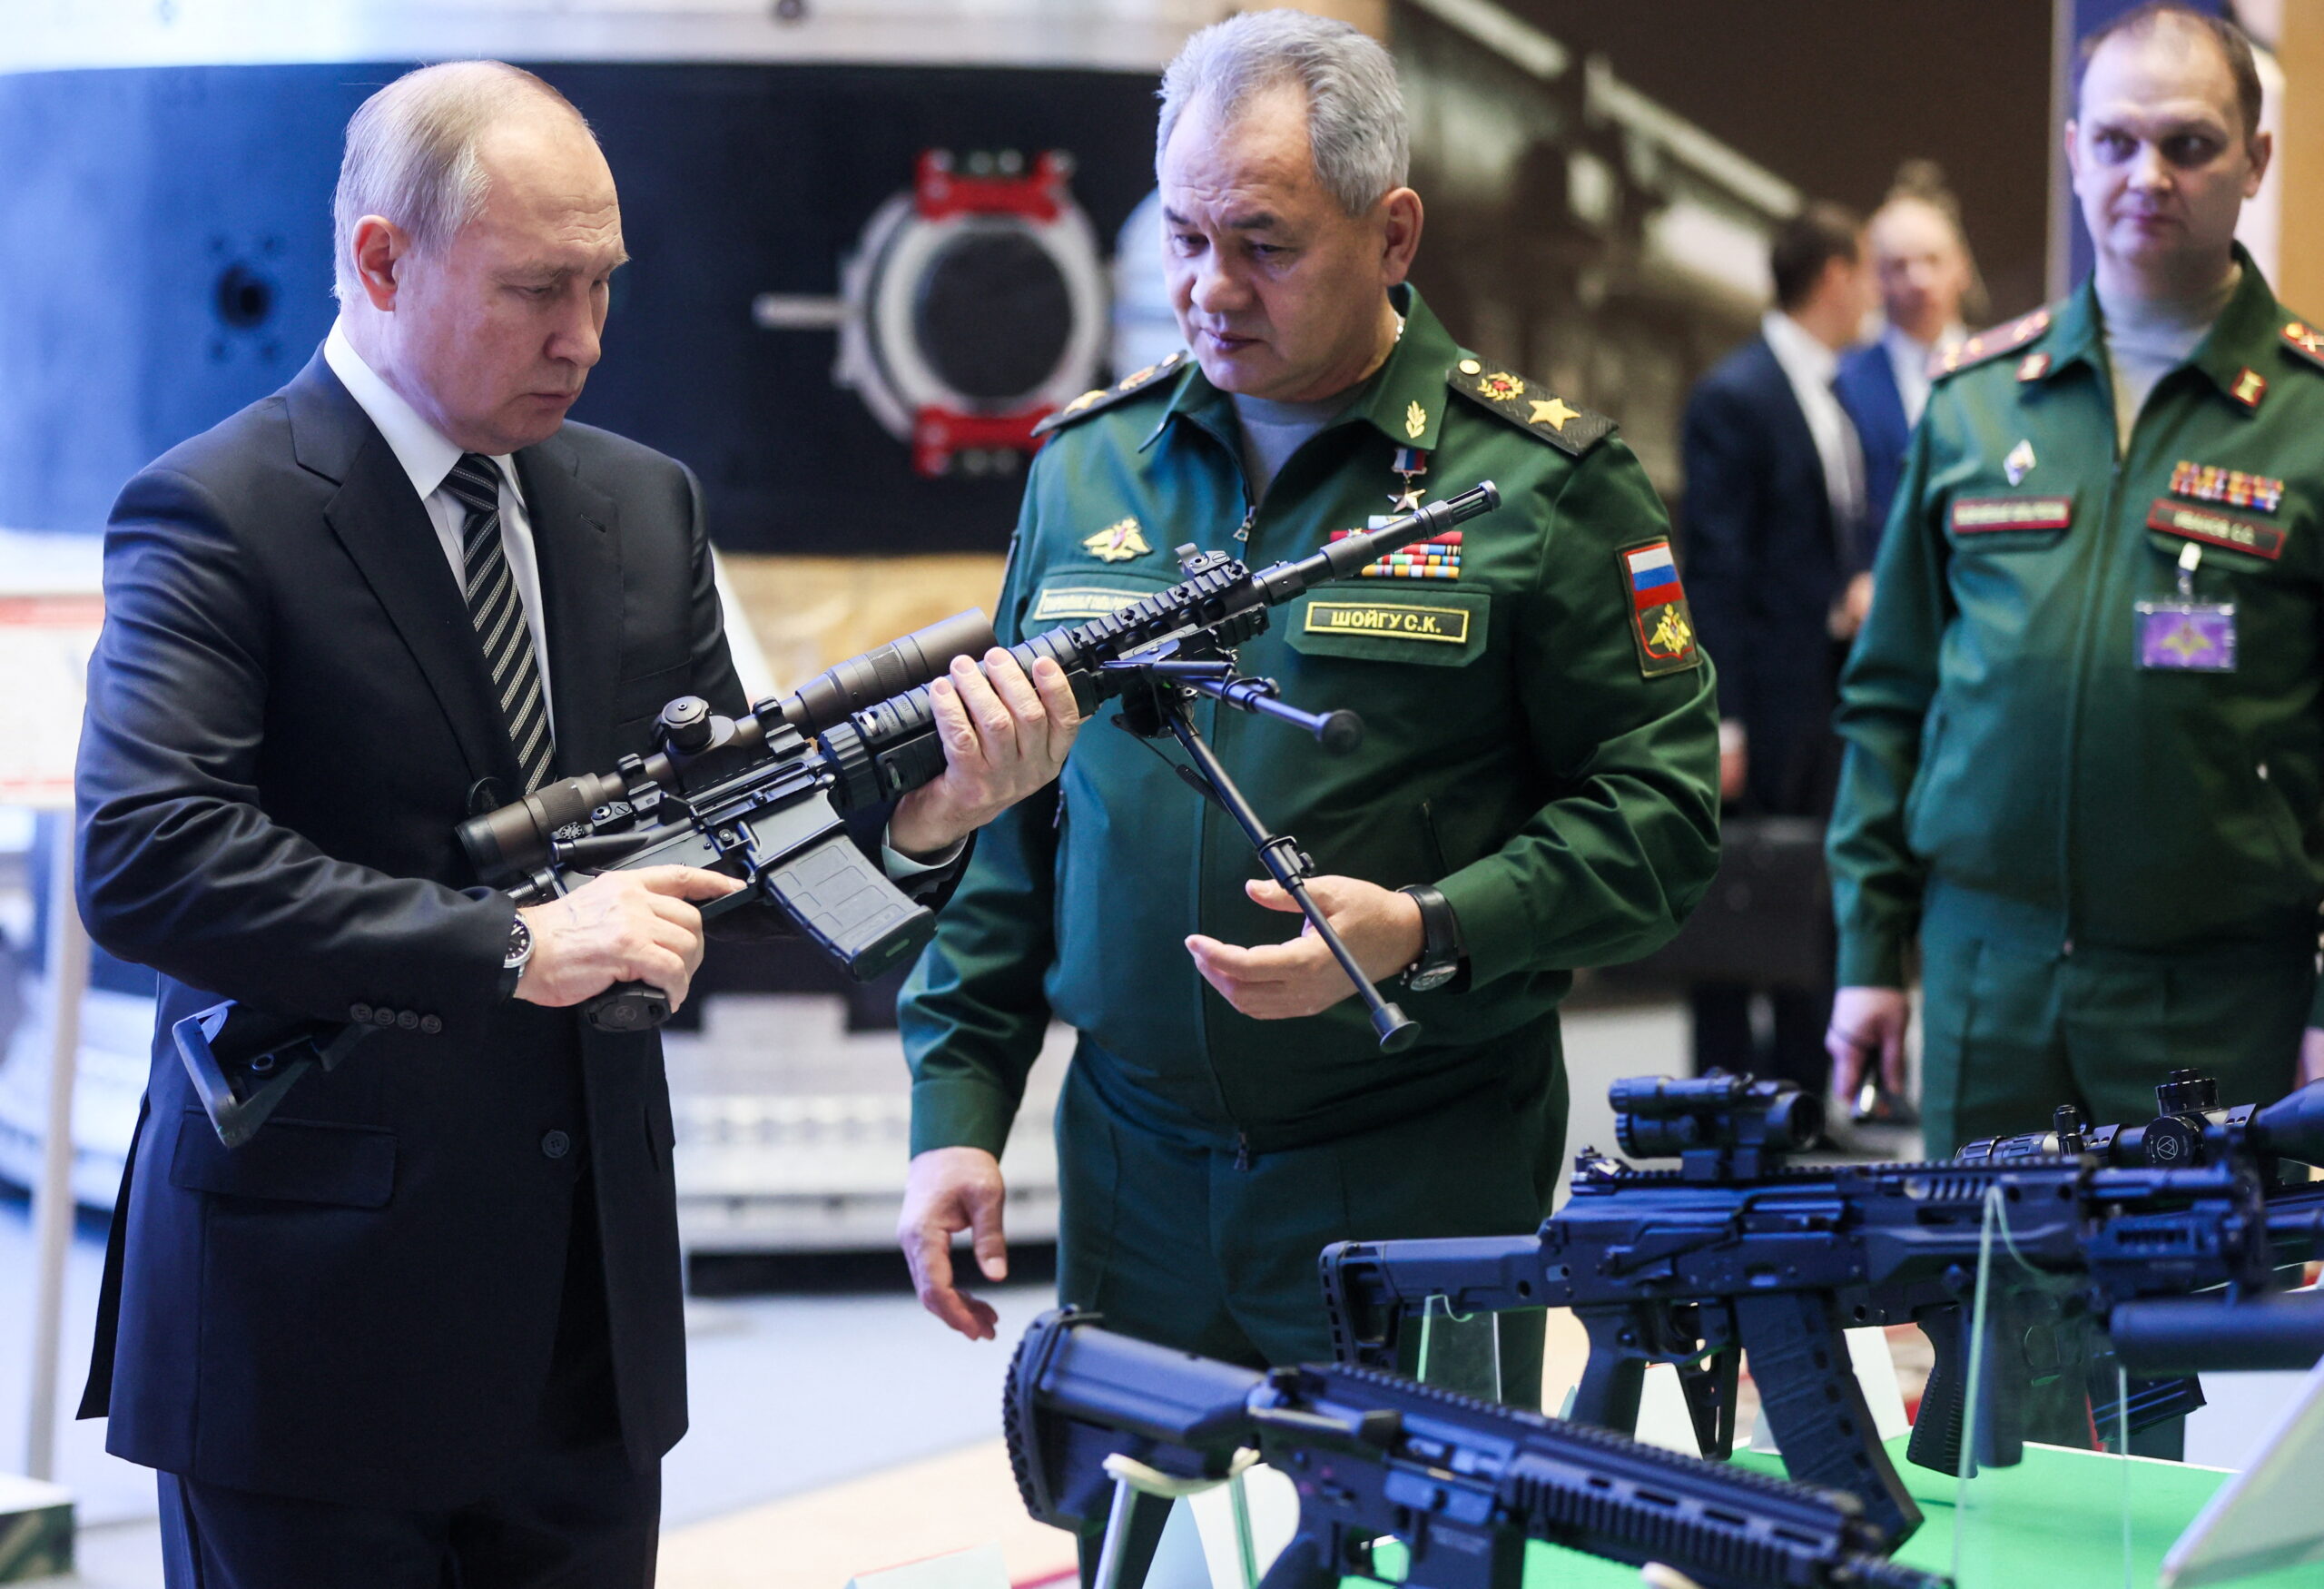 Russian President Vladimir Putin and Defence Minister Sergei Shoigu attend a military exhibition before an expanded meeting of the Defence Ministry Board in Moscow, Russia December 21, 2021. Sputnik/Mikhail Metzel/Pool via REUTERS ATTENTION EDITORS - THIS IMAGE WAS PROVIDED BY A THIRD PARTY.